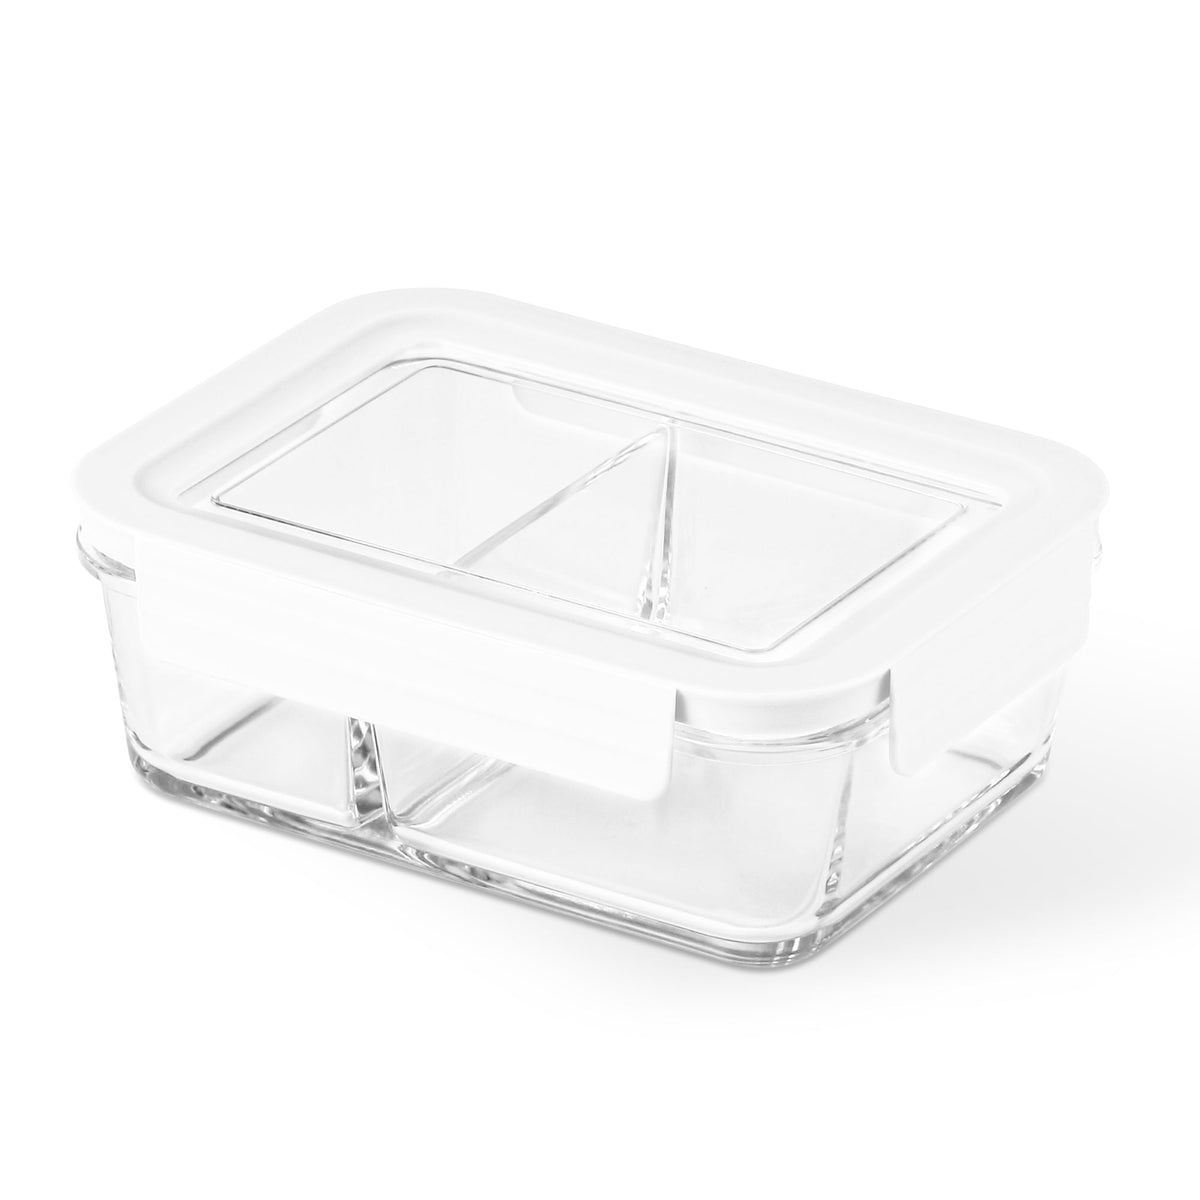 https://notiq.com/cdn/shop/products/meal-prep-glass-food-storage-containers-770261.jpg?crop=center&height=1200&v=1691693588&width=1200